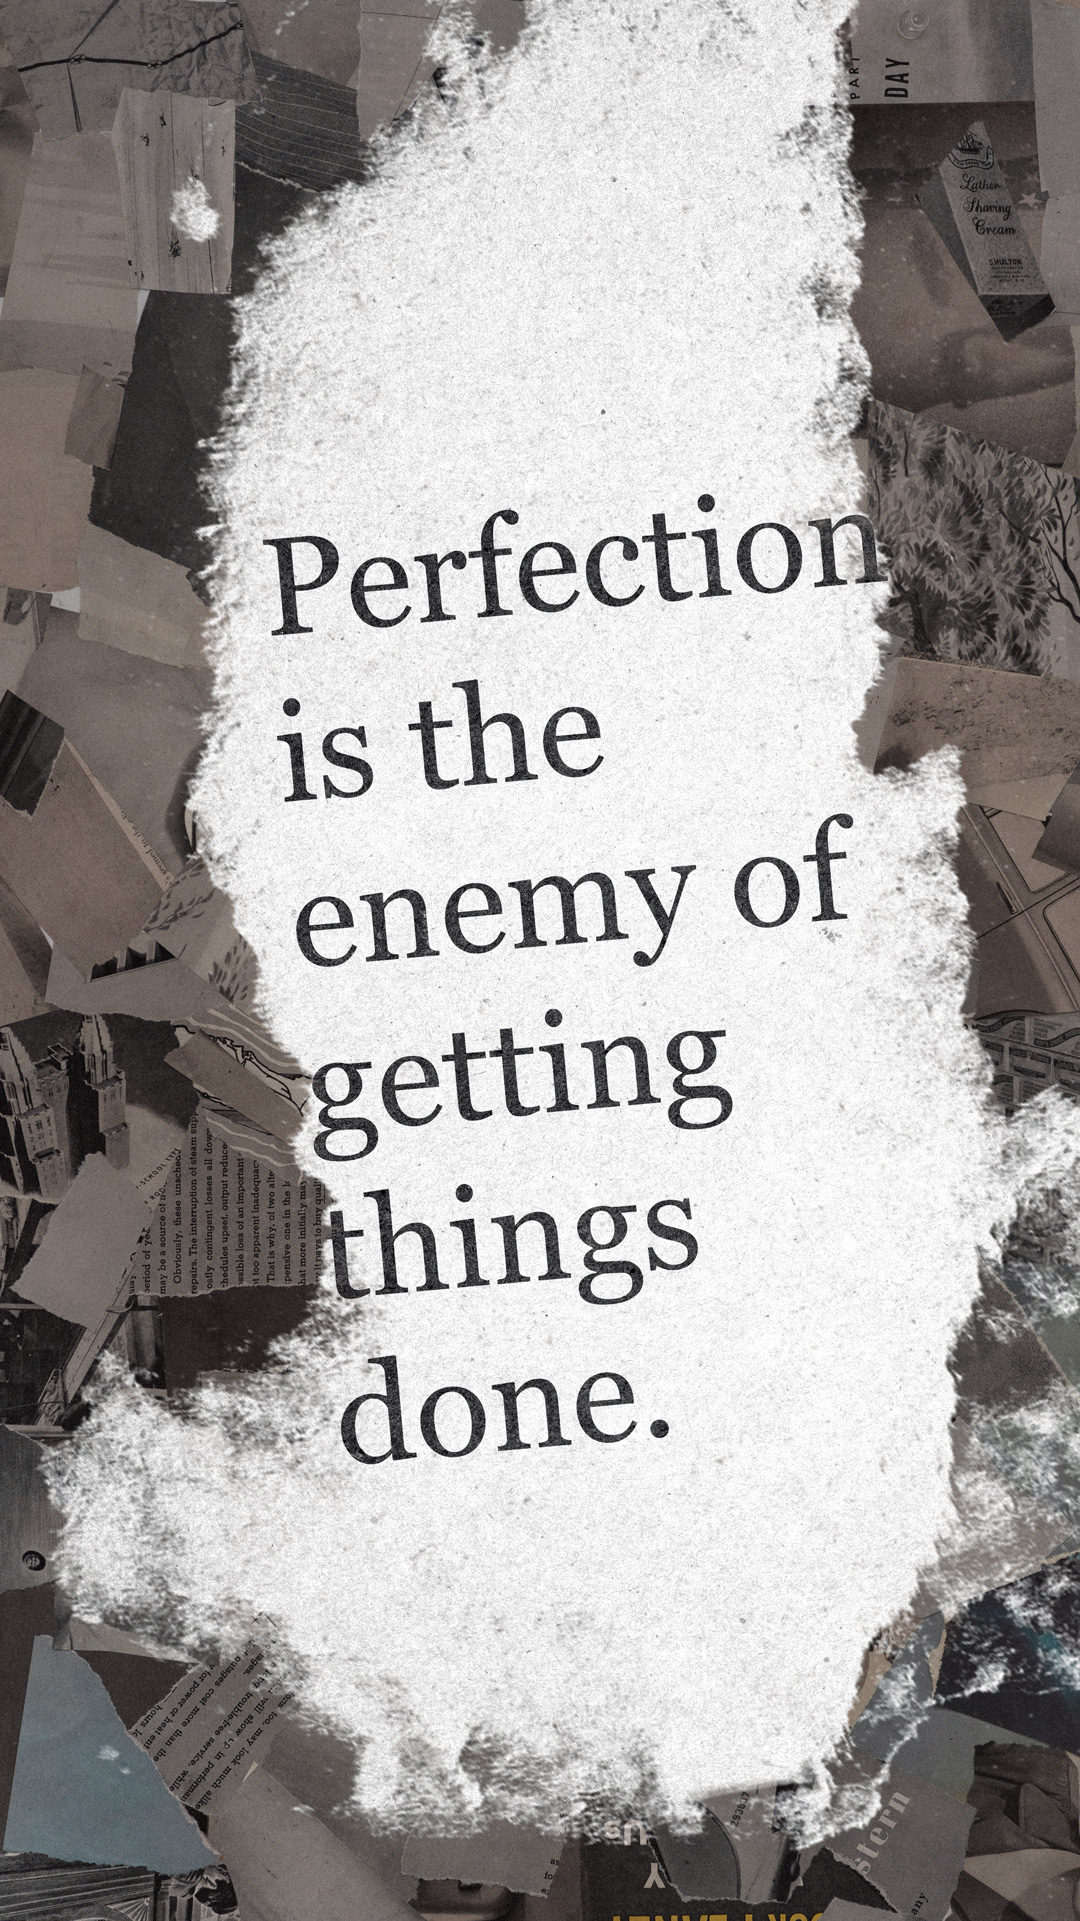 perfection is the enemy of getting things done